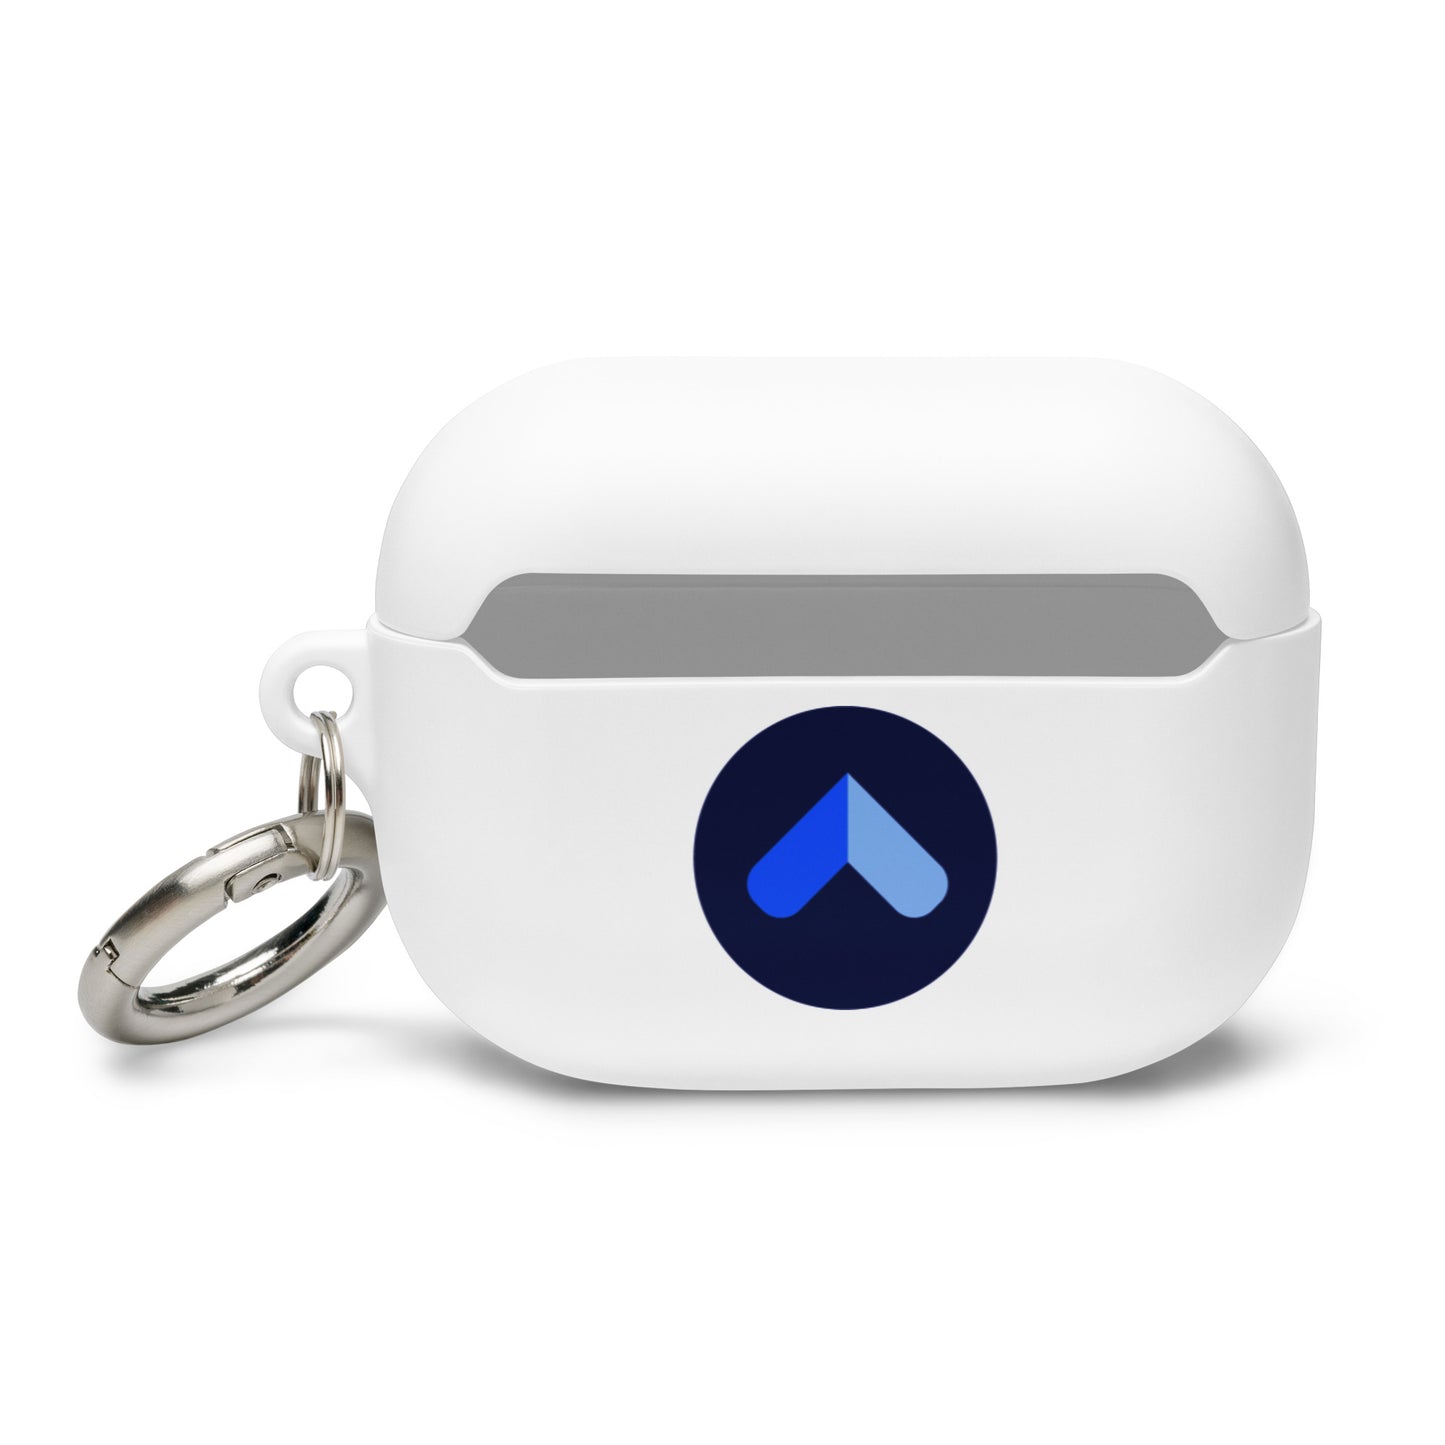 White AirPods case with blue MEDDICC logos